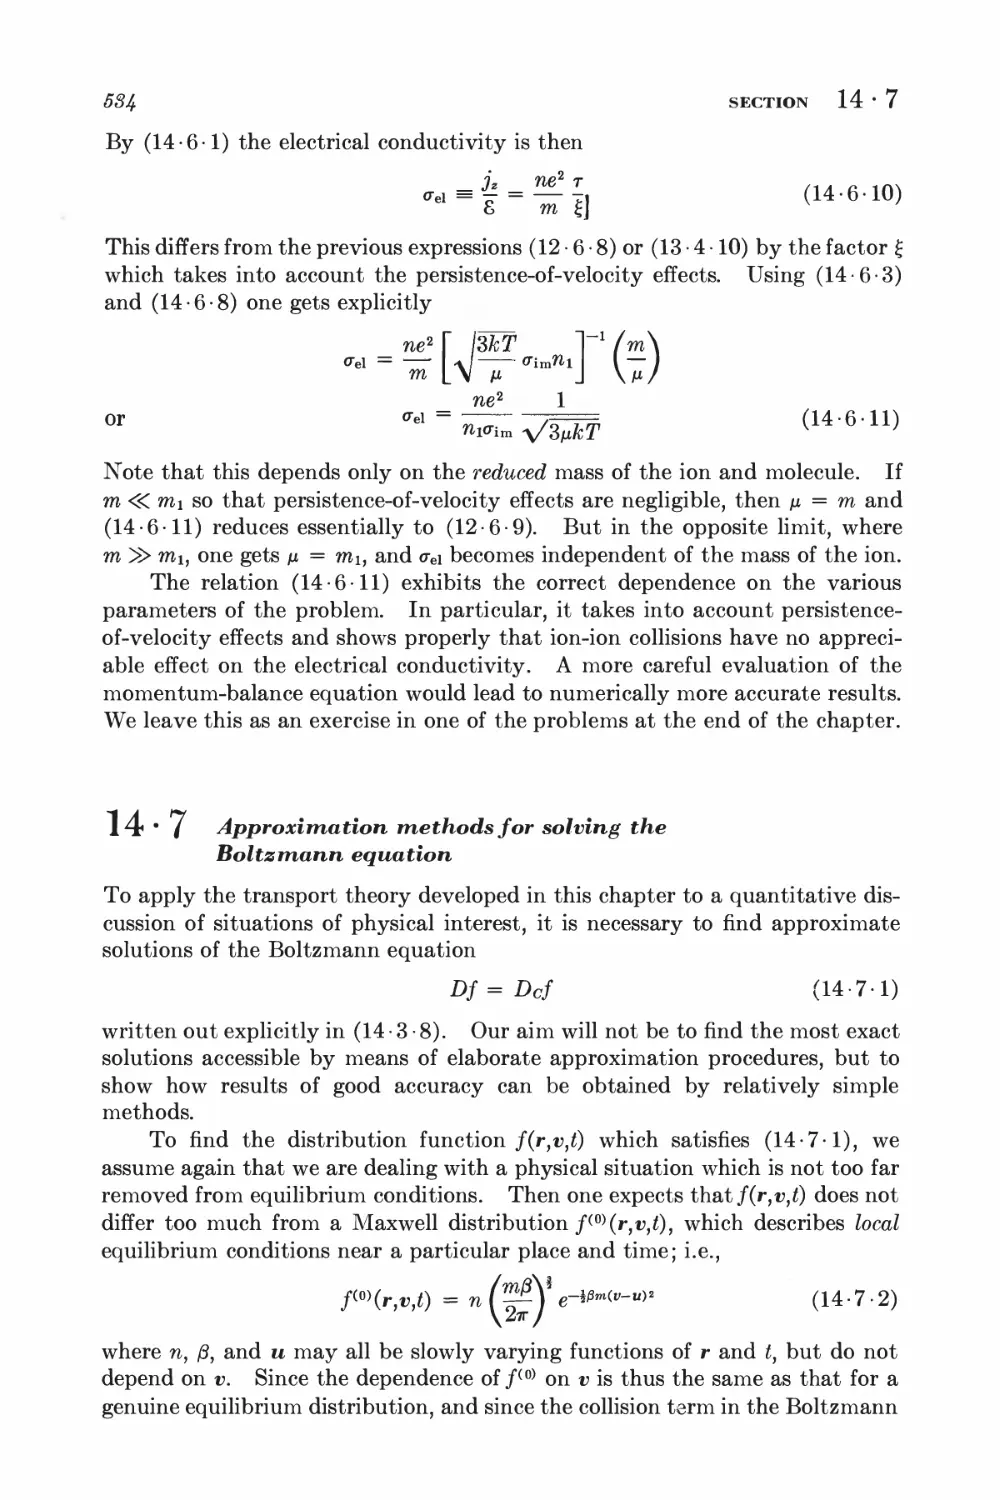 14.7 Approximation methods for solving the Boltzmann equation